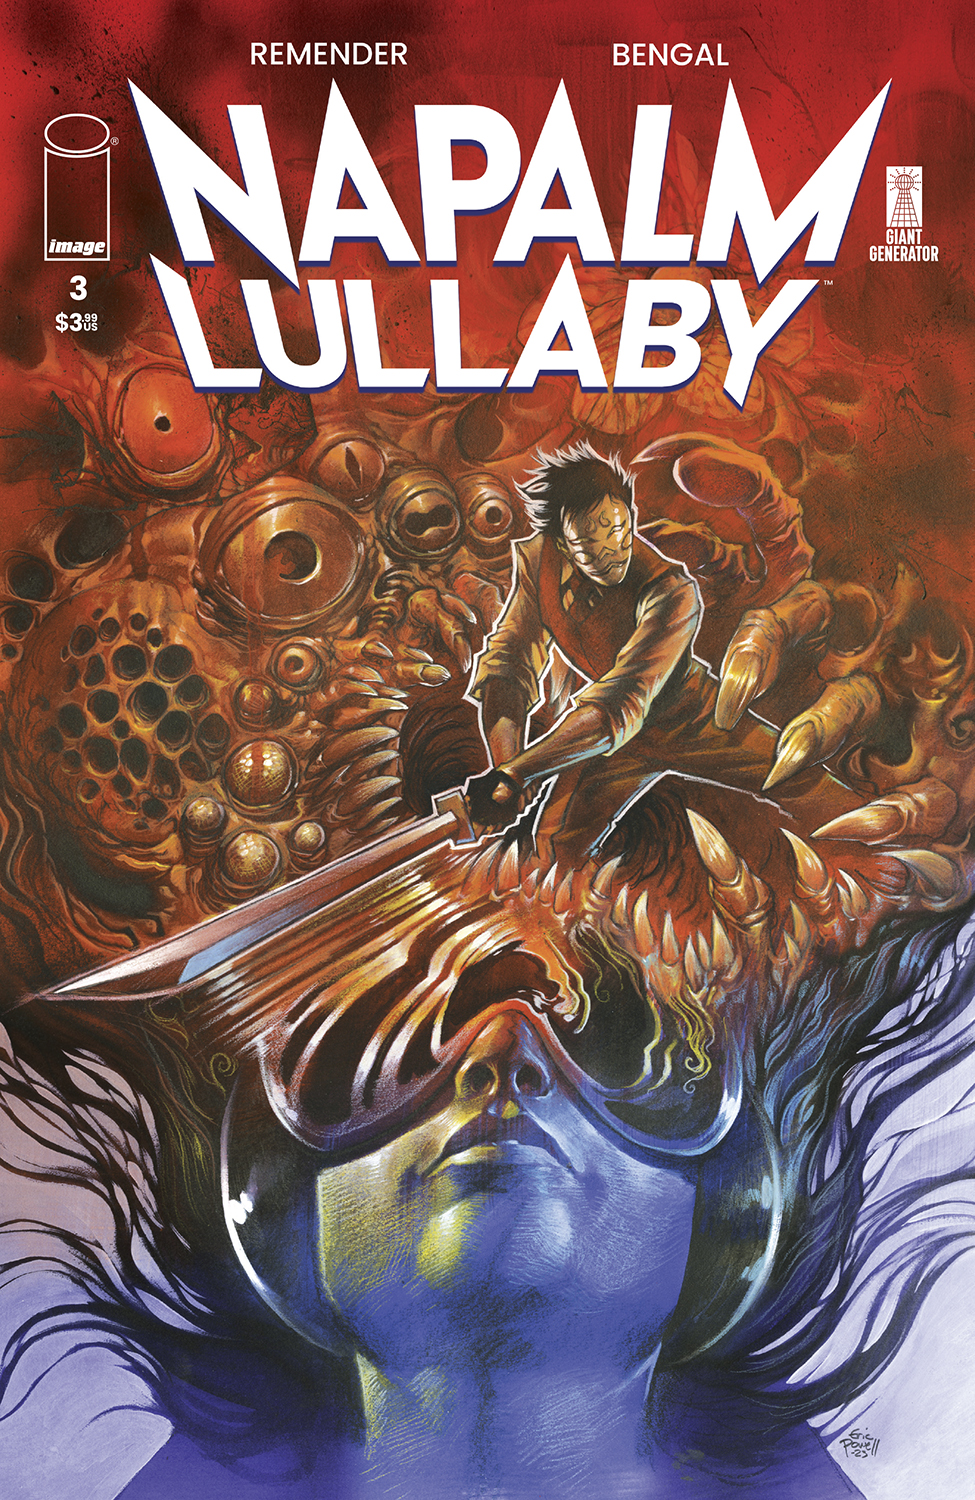 Napalm Lullaby #3 Cover B 1 for 10 Incentive Eric Powell Variant